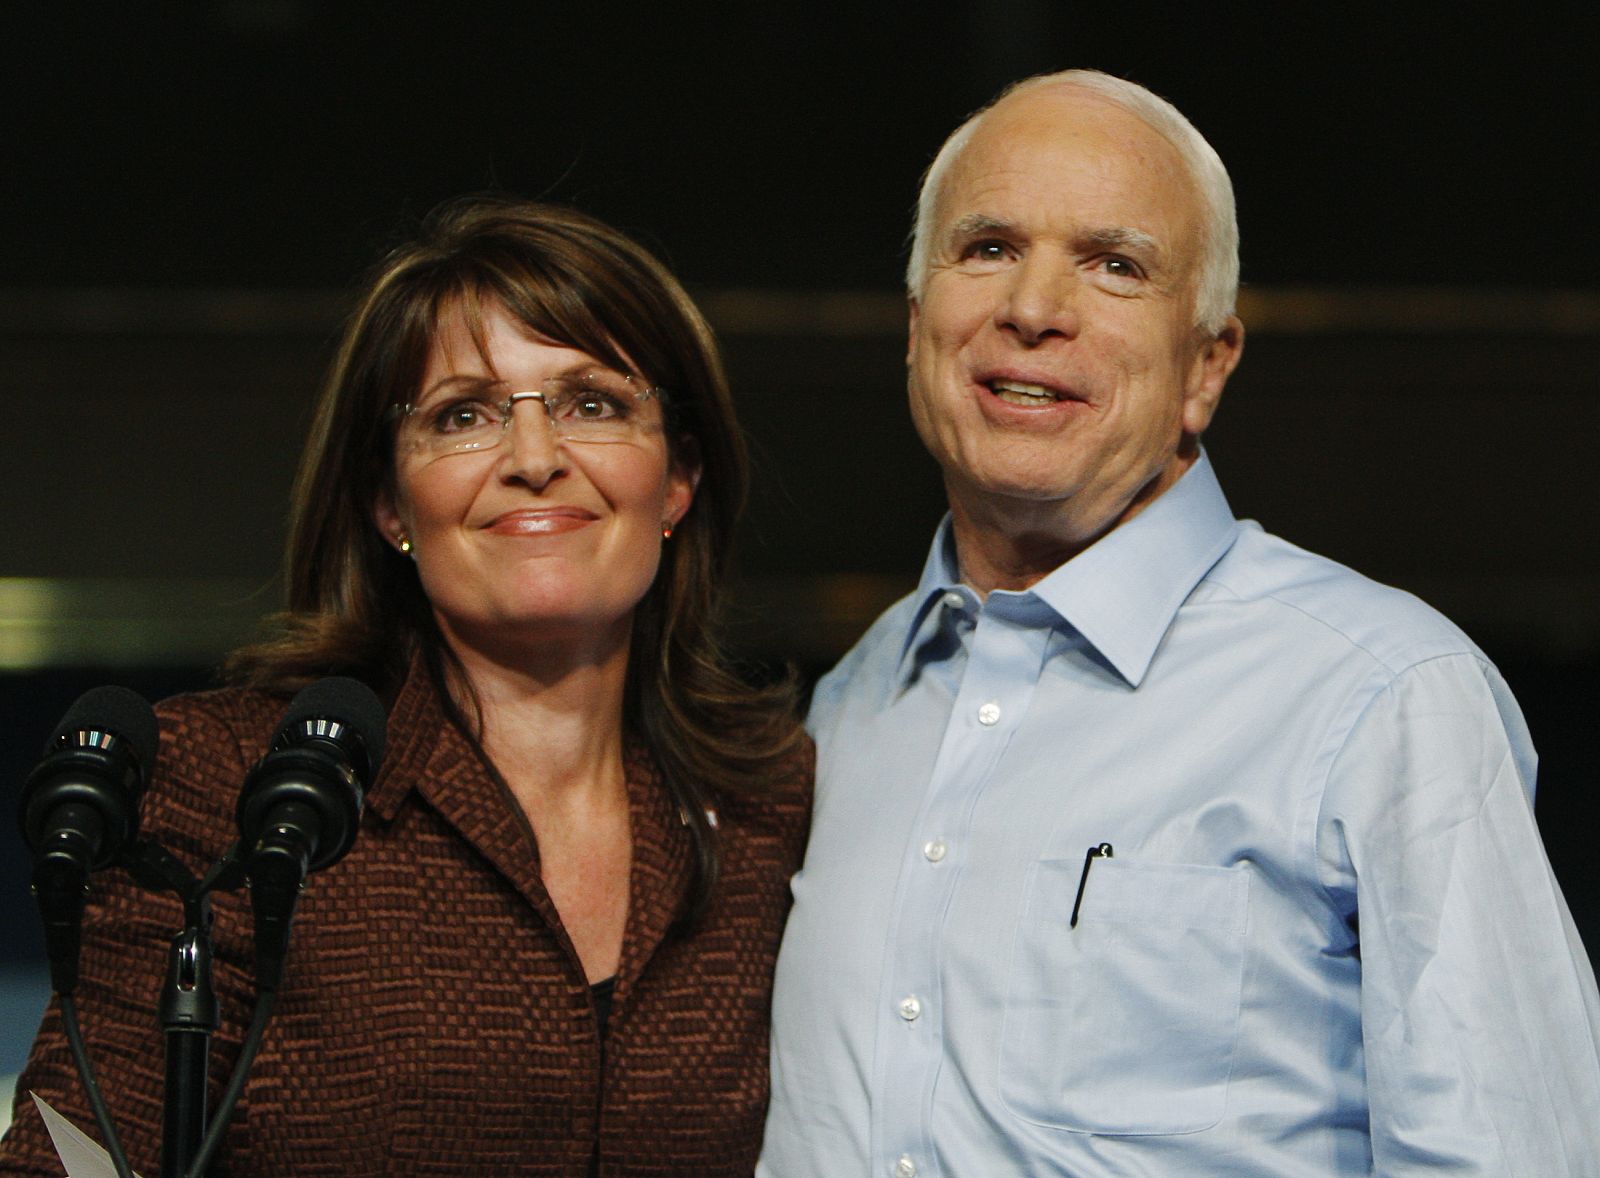 U.S. Republican presidential nominee Senator John McCain and Republican vice-presidential nominee Alaska Governor Sarah Palin stand together onstage at a campaign rally in Albuquerque